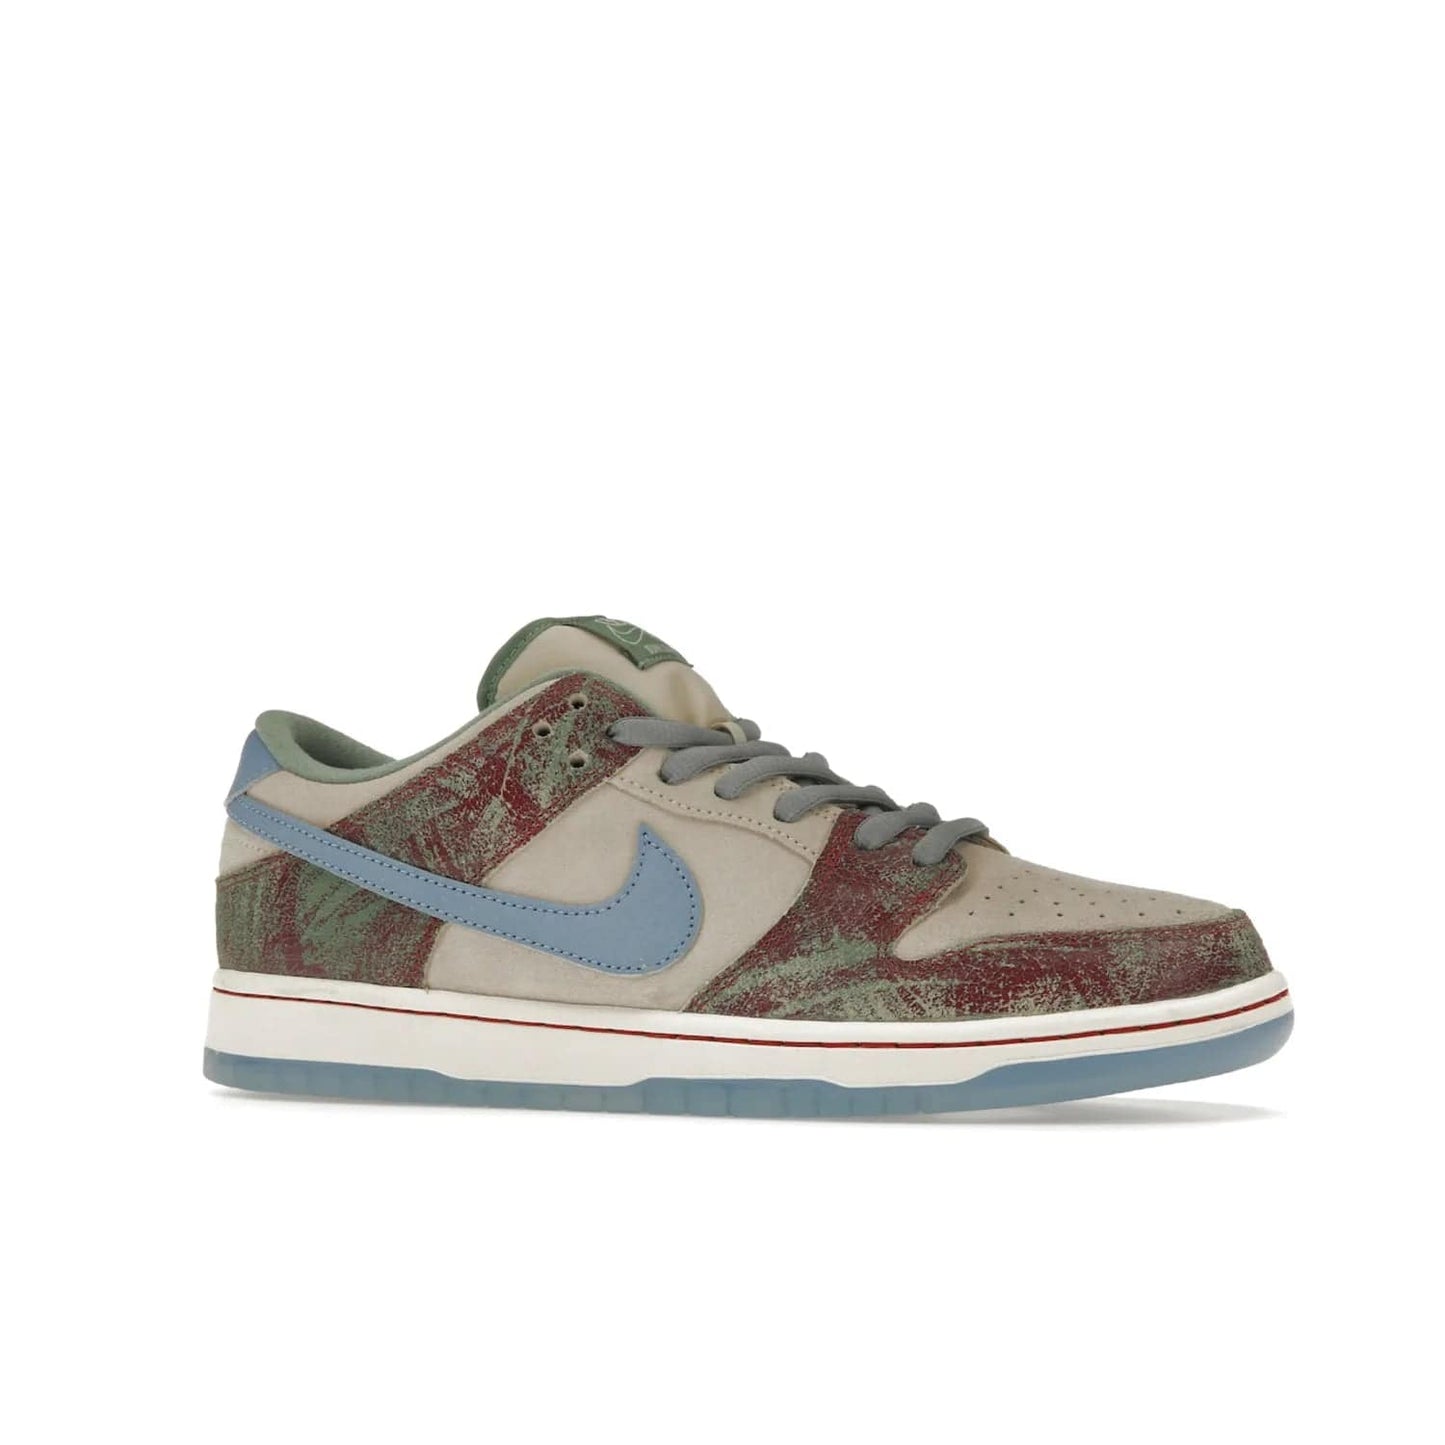 Nike SB Dunk Low Crenshaw Skate Club - Image 3 - Only at www.BallersClubKickz.com - Introducing the Nike SB Dunk Low Crenshaw Skate Club! Classic skate shoes with Sail and Light Blue upper, Cedar accents, padded collars and superior grip for comfortable, stable performance and style. Ideal for any skate session.